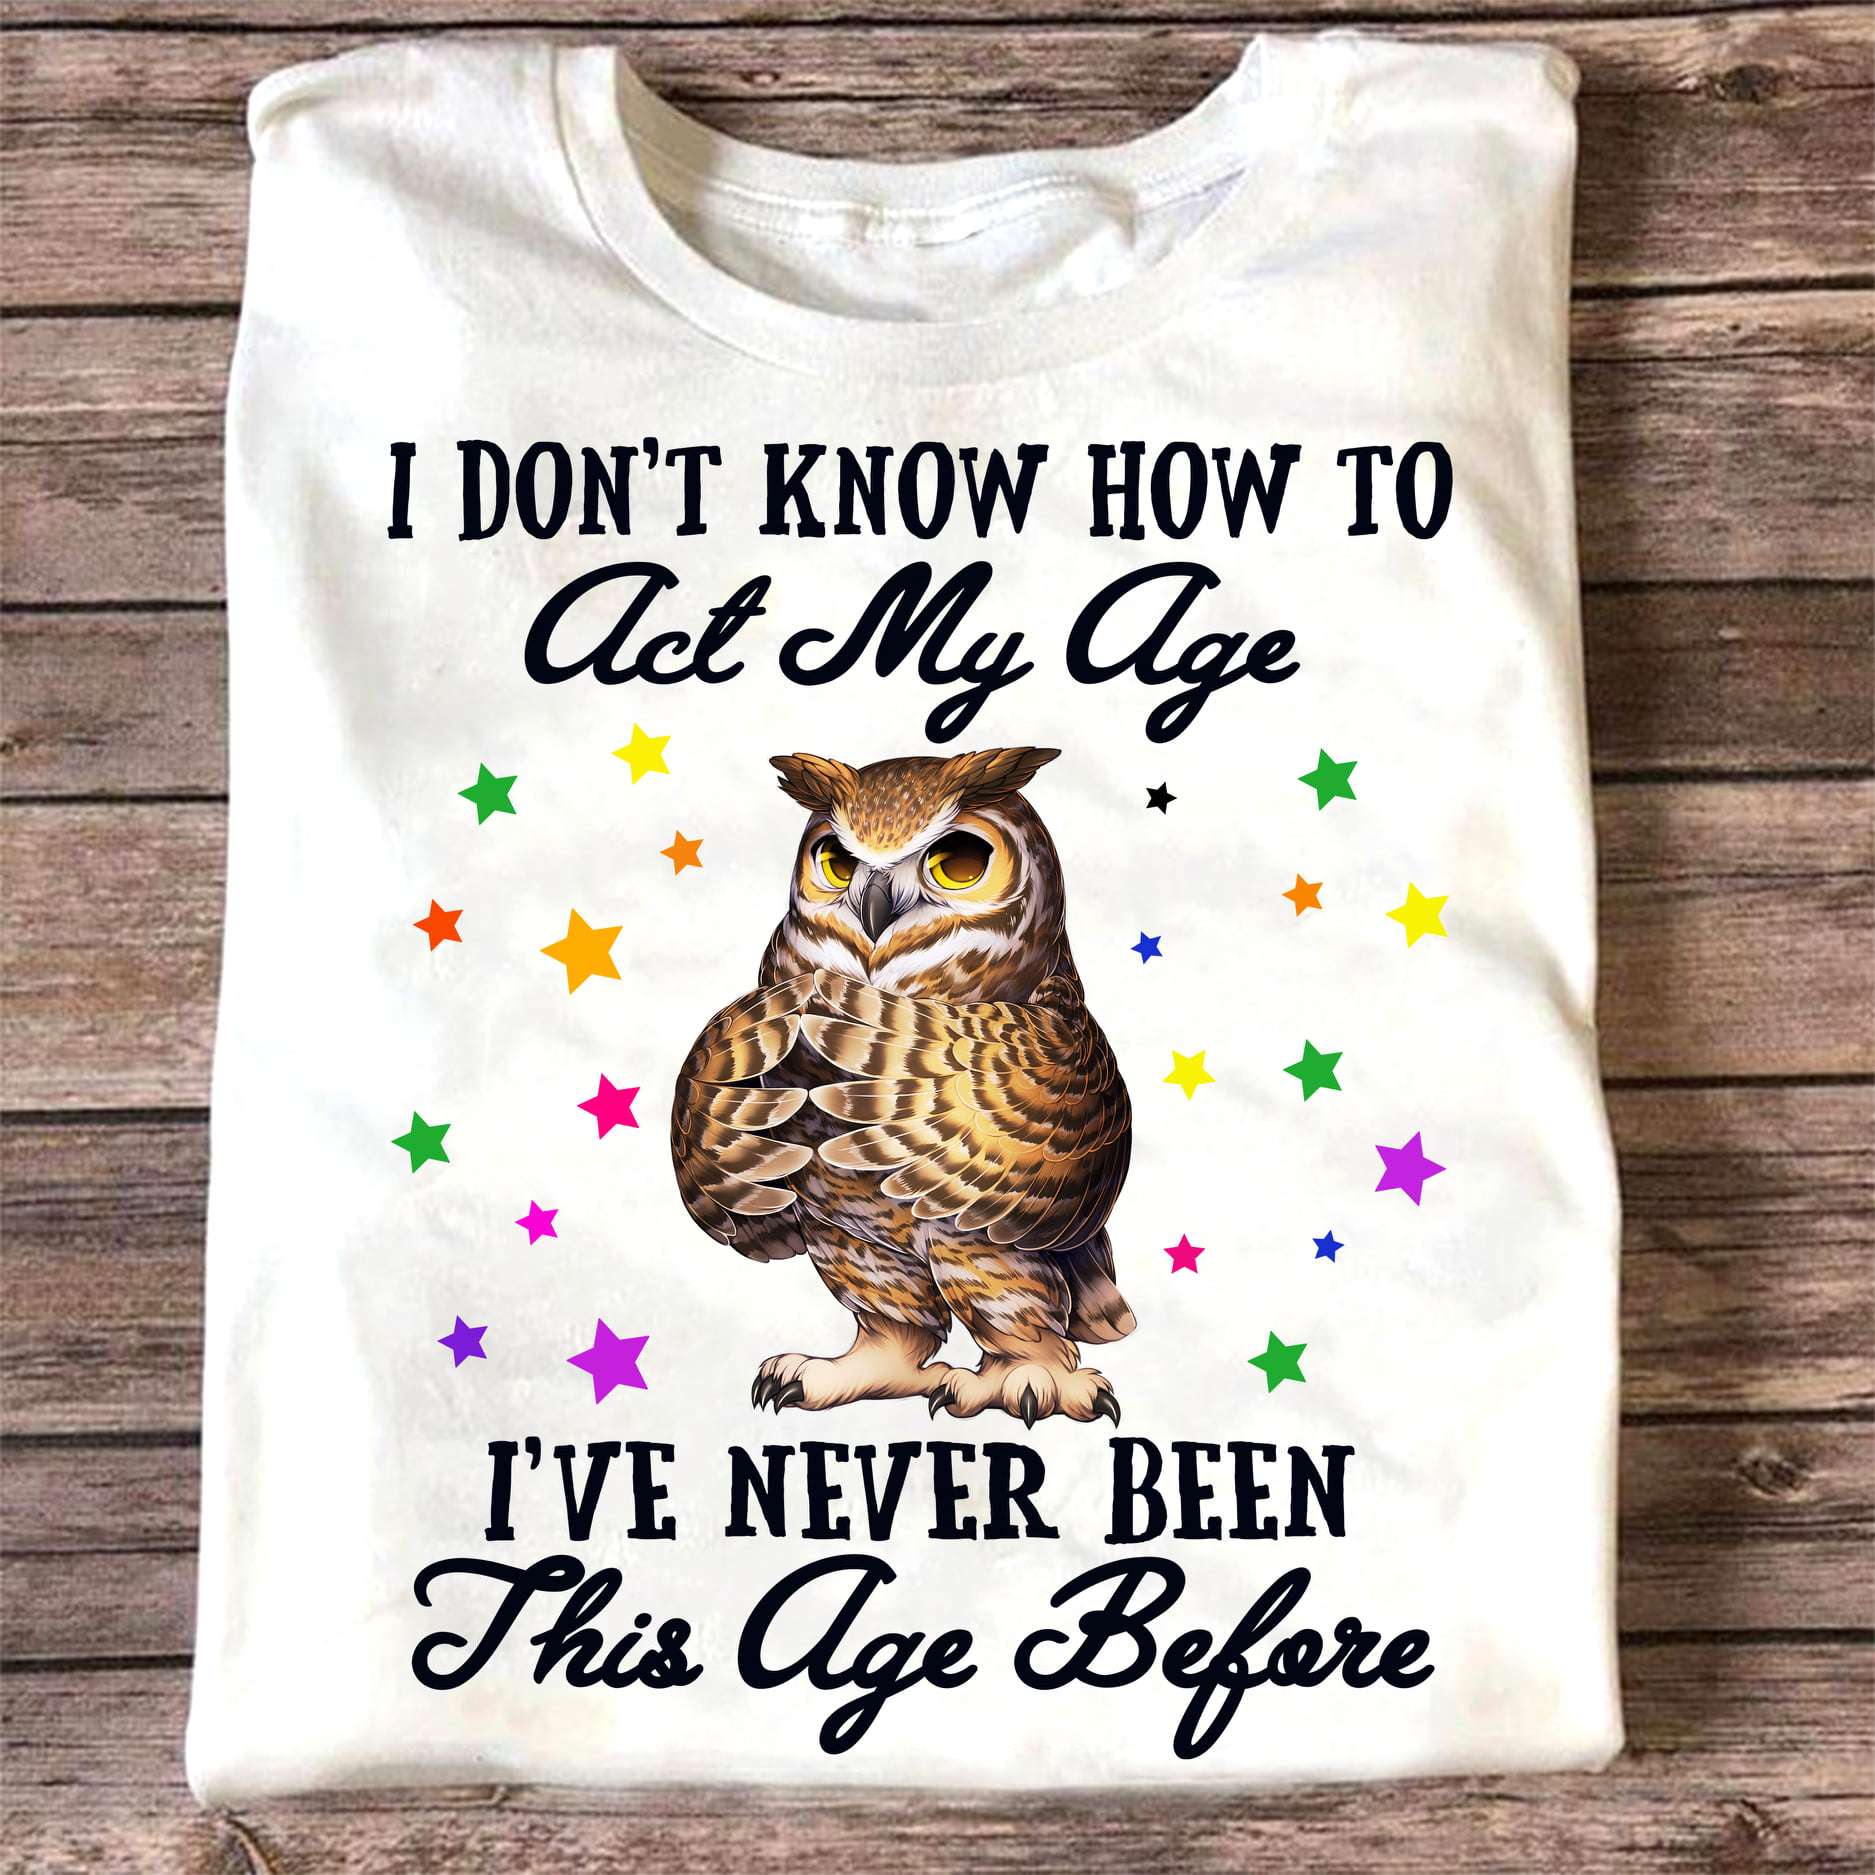 I don't know hwo to act my age I've never been this age before - Curious owl, owl the gorgeous animal